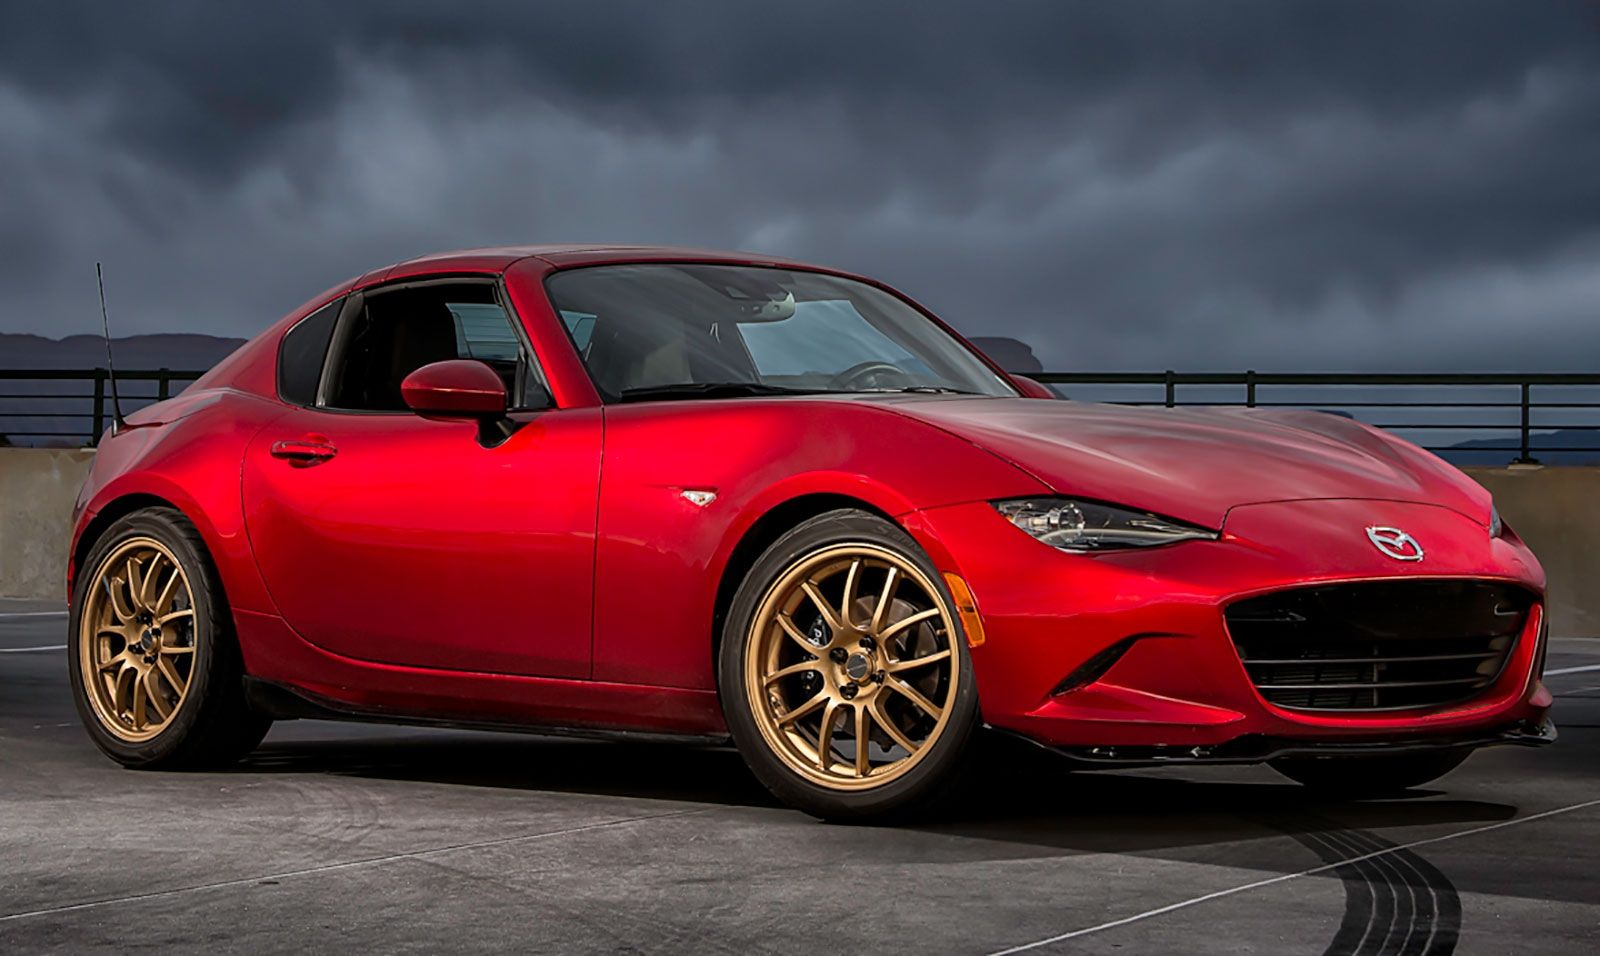 Miata Monday with our Ventus 2 Aerodynamic package for the ND Mazda Miata.  This package includes our Front Splitter Kit, Dive Plane…